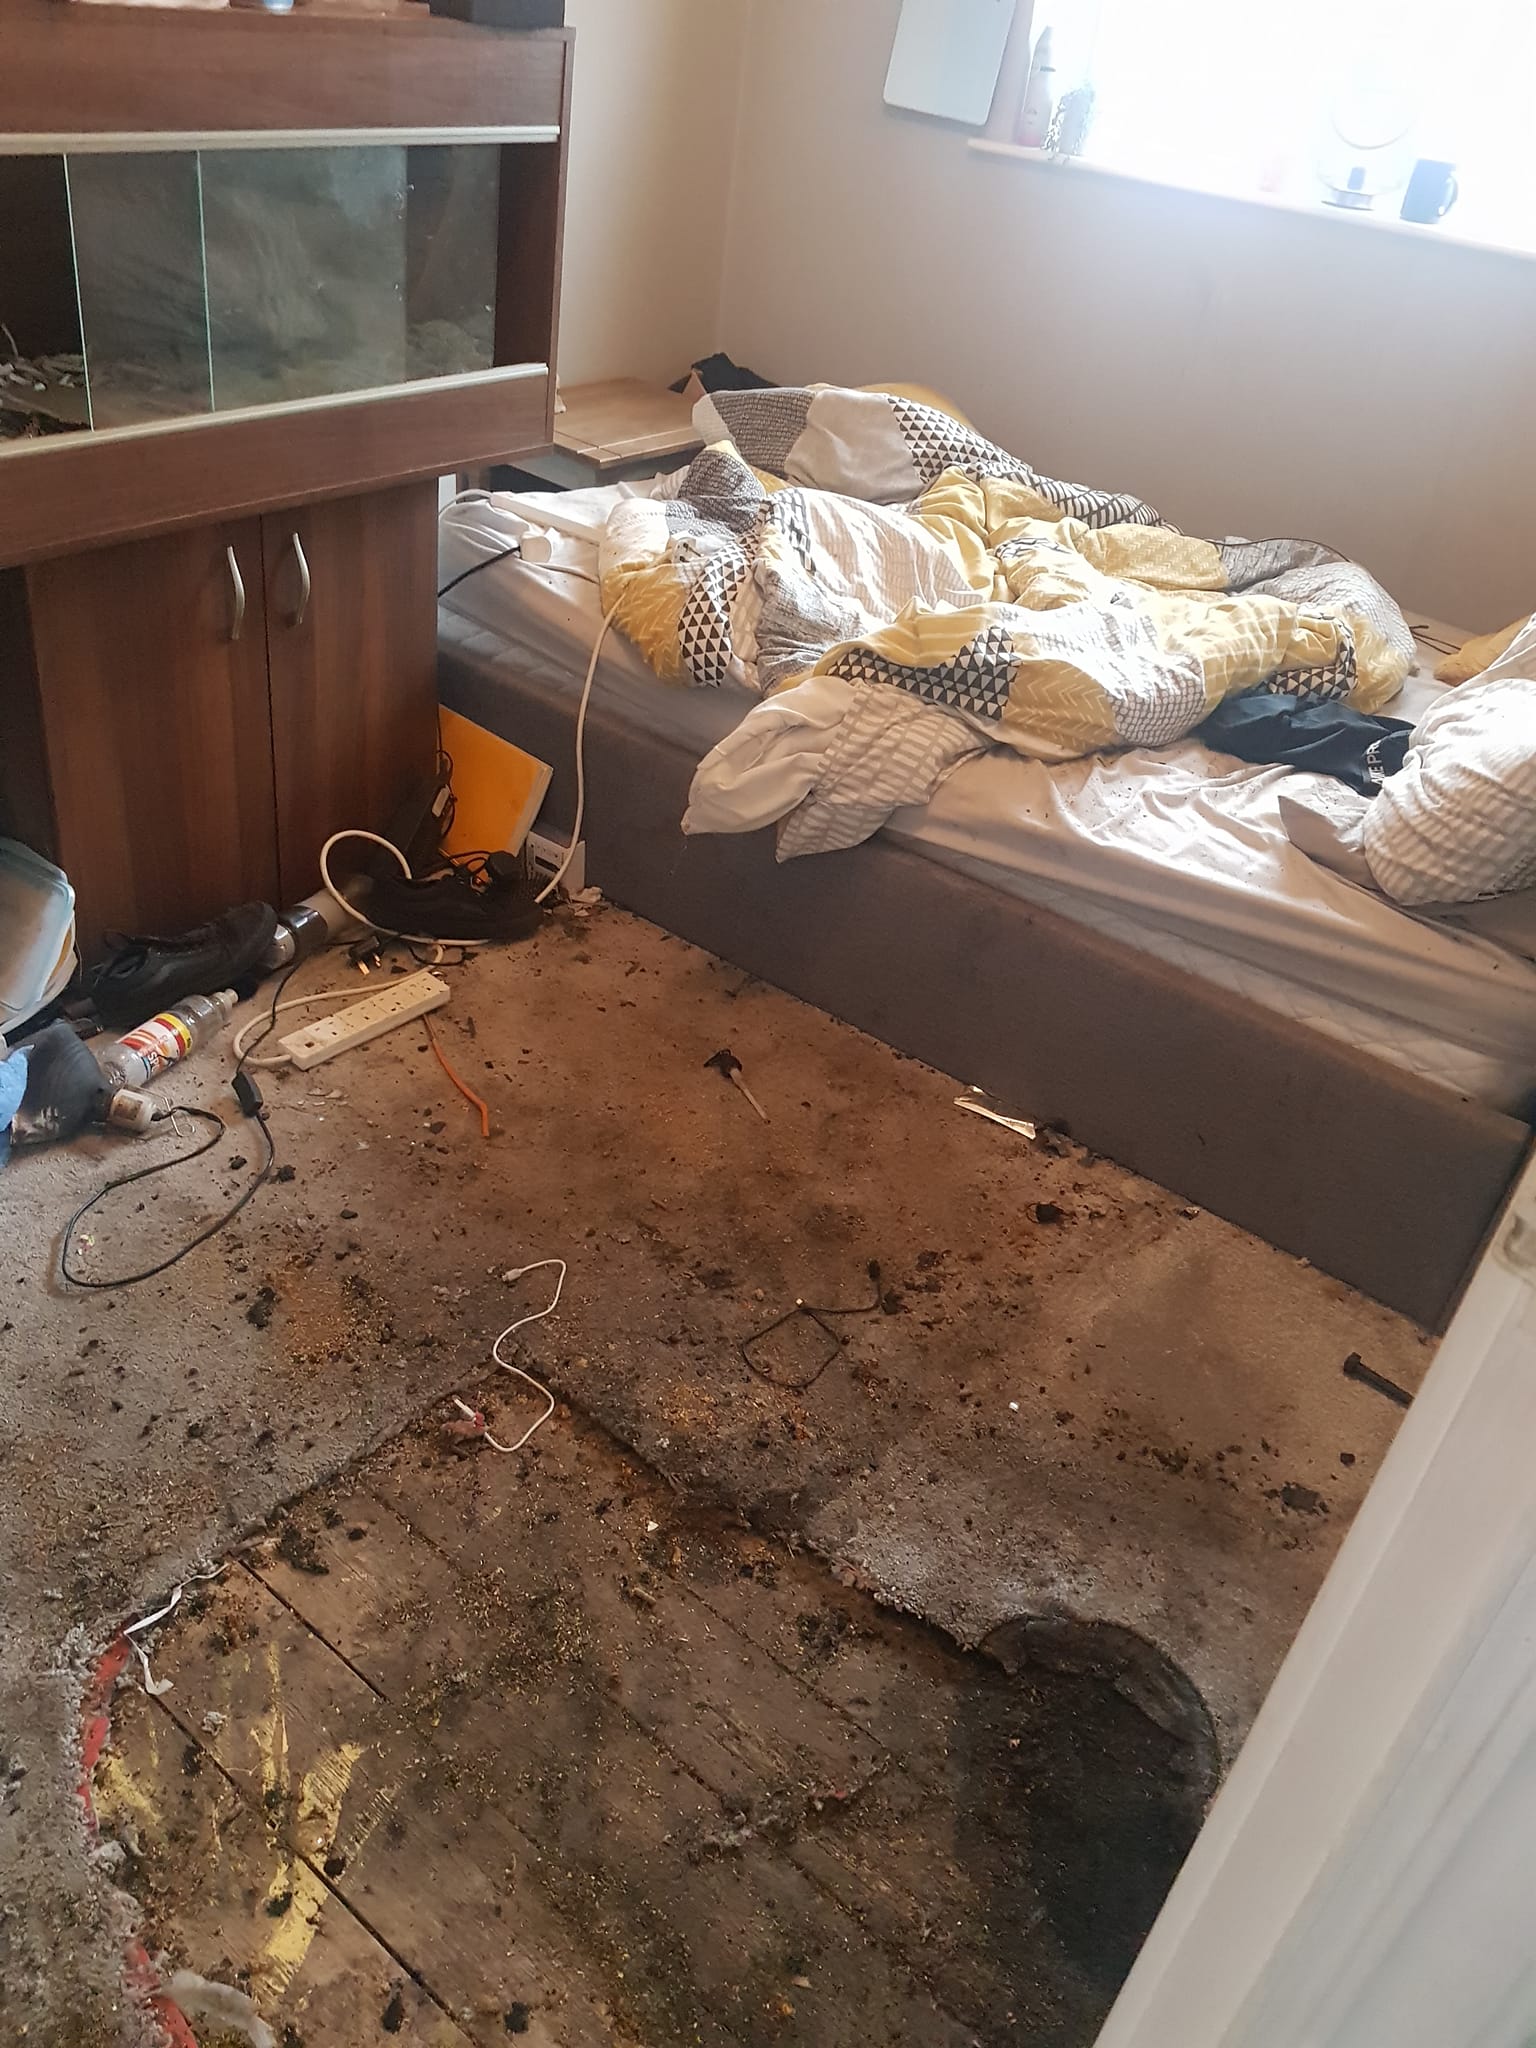 aftermath of fire damage in a bedroom of the home of 103 year old woman lilian howitt